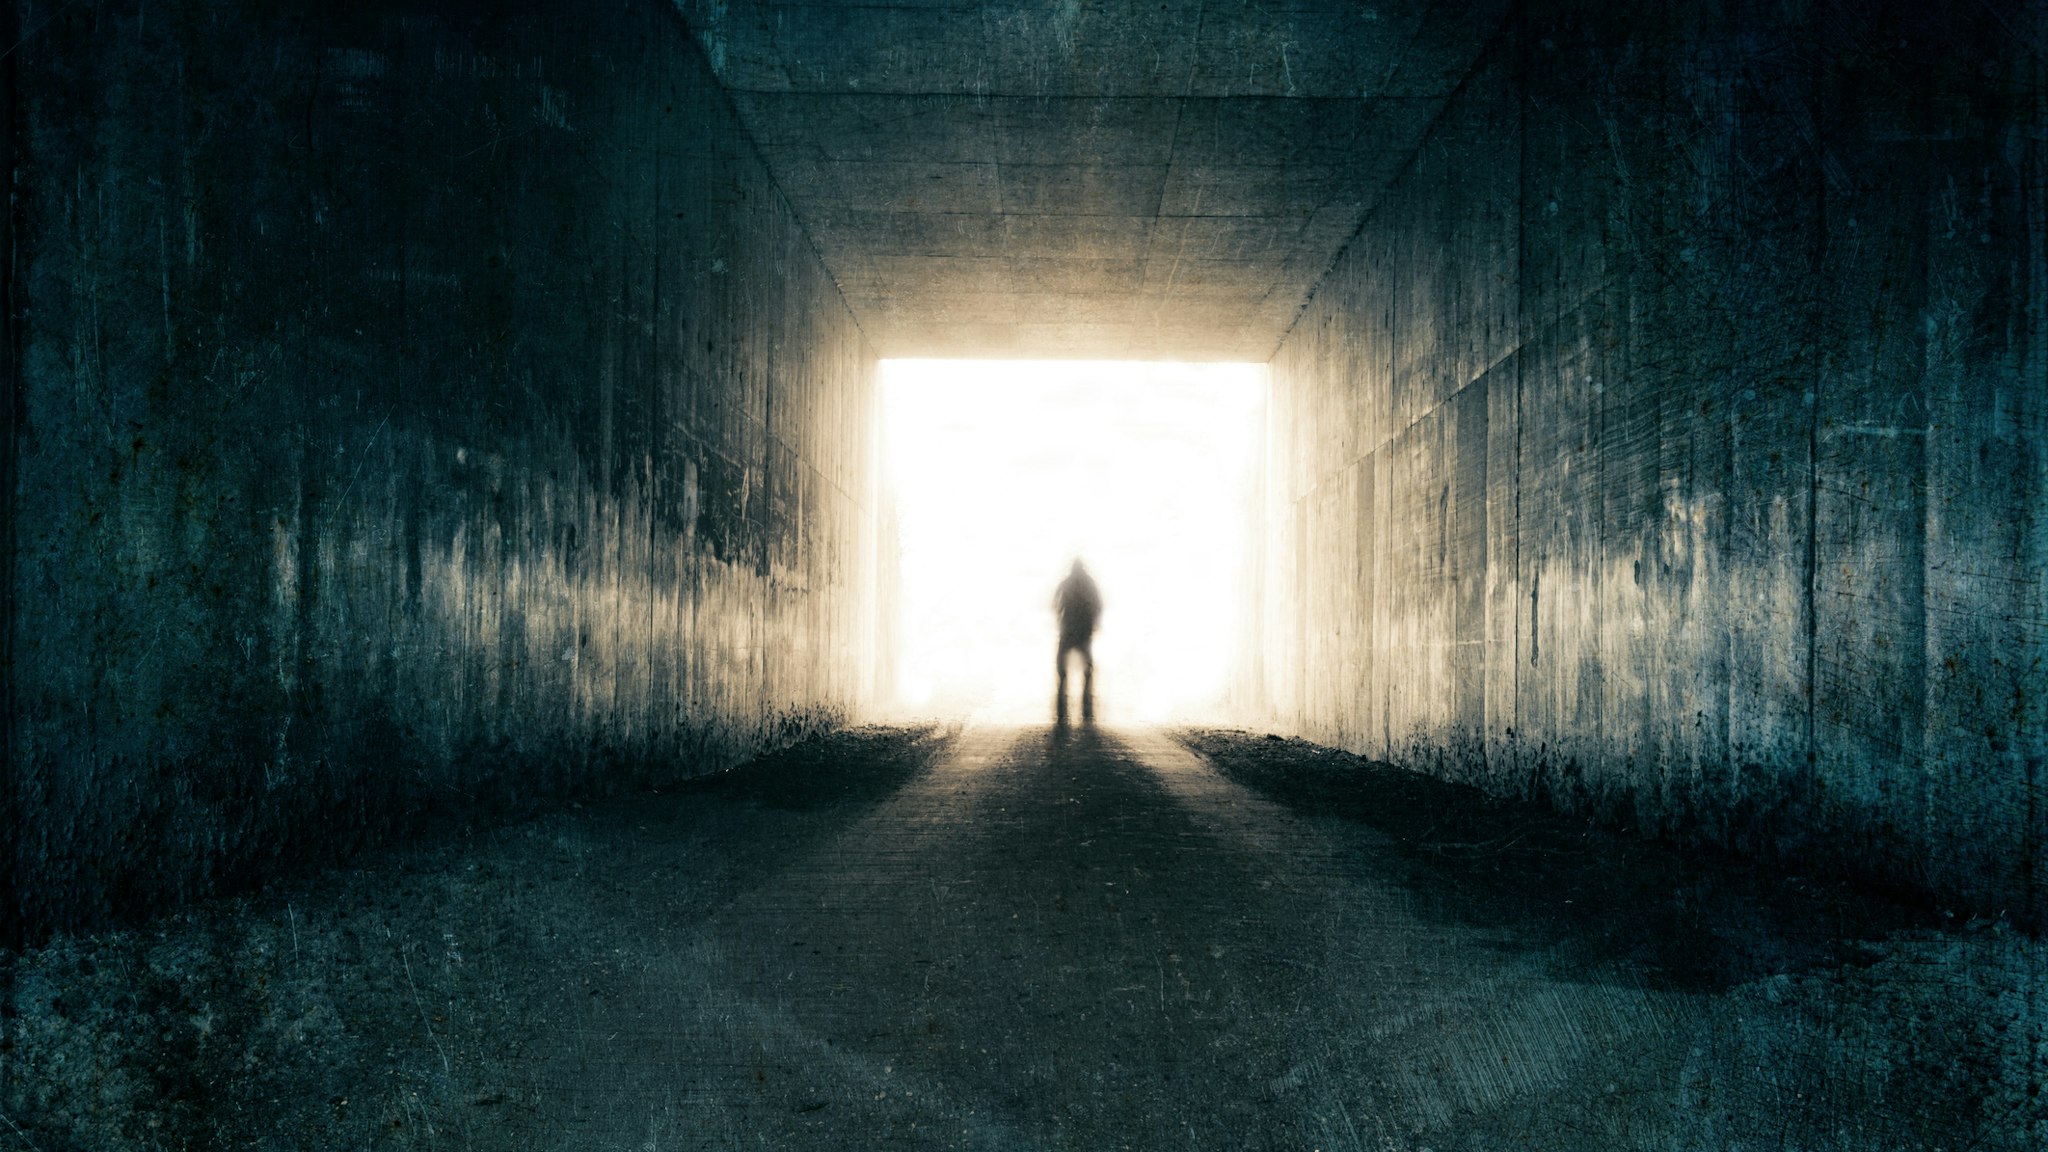 A silhouette of a blurred figure emerging from the light at the end of a dark sinister tunnel. With a grunge, vintage, grainy edit. - stock photo